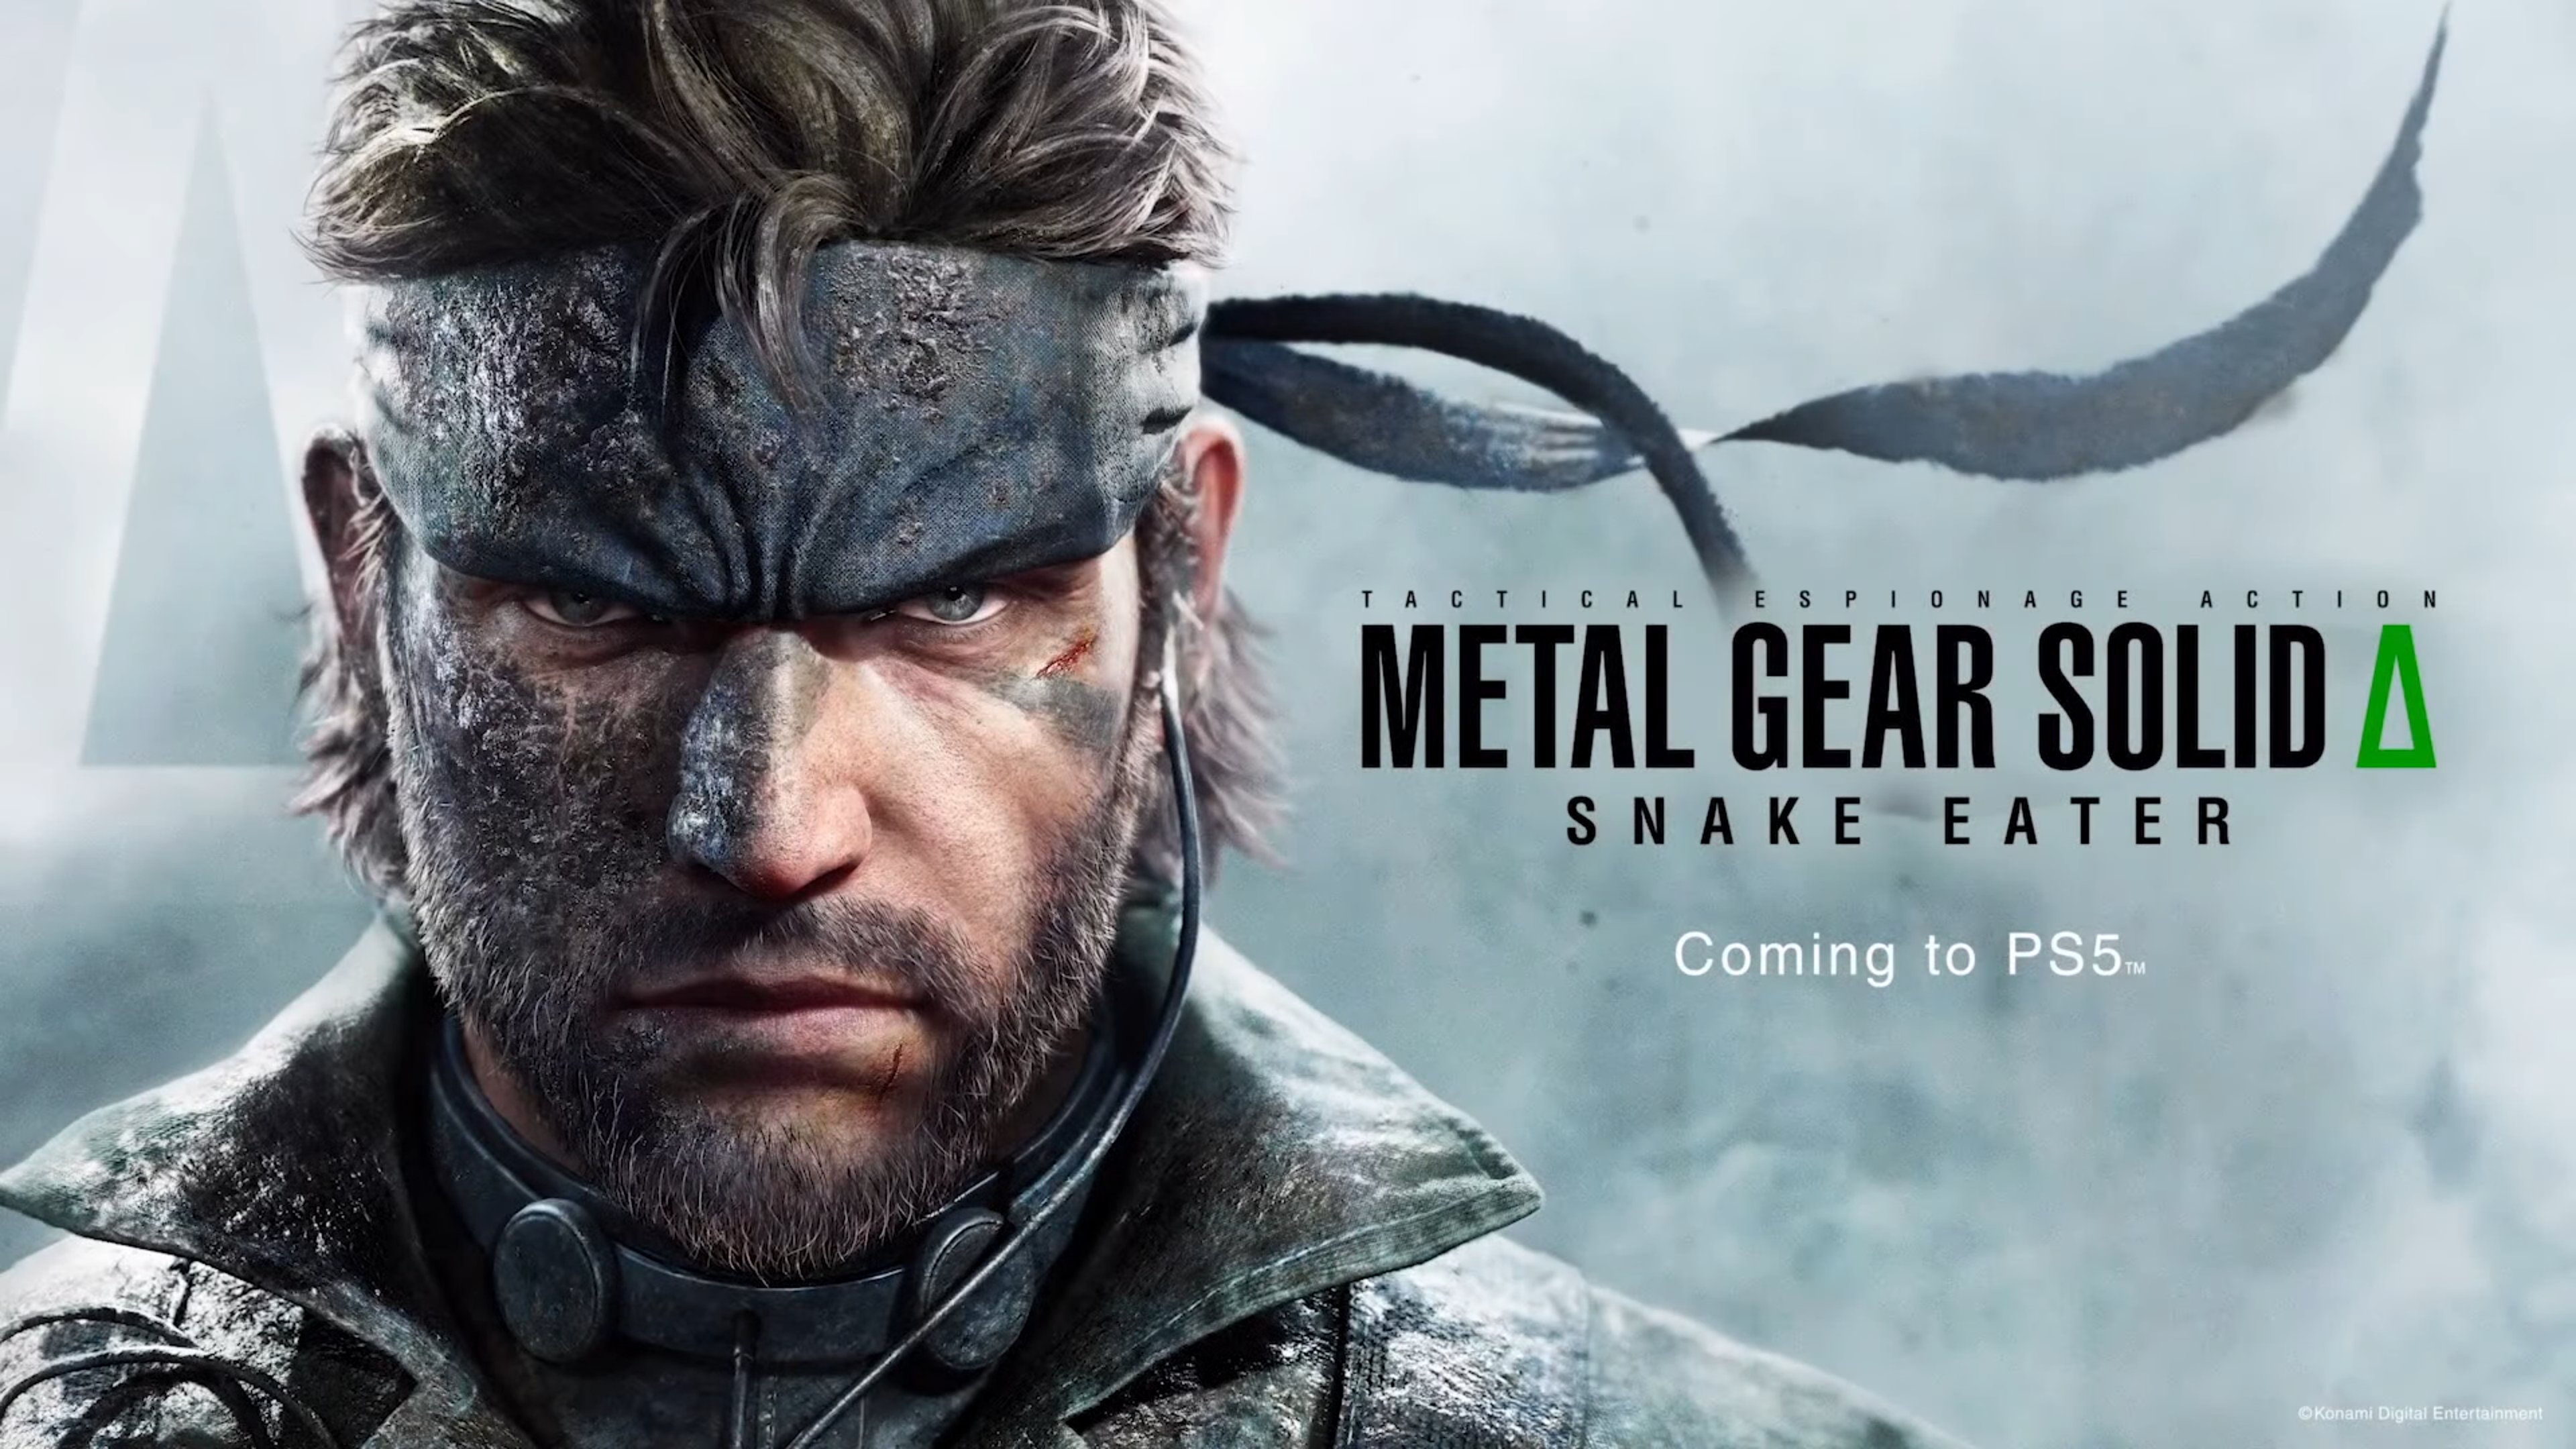 metal-gear-solid-3-snake-eater-is-getting-a-full-remake-techno-blender